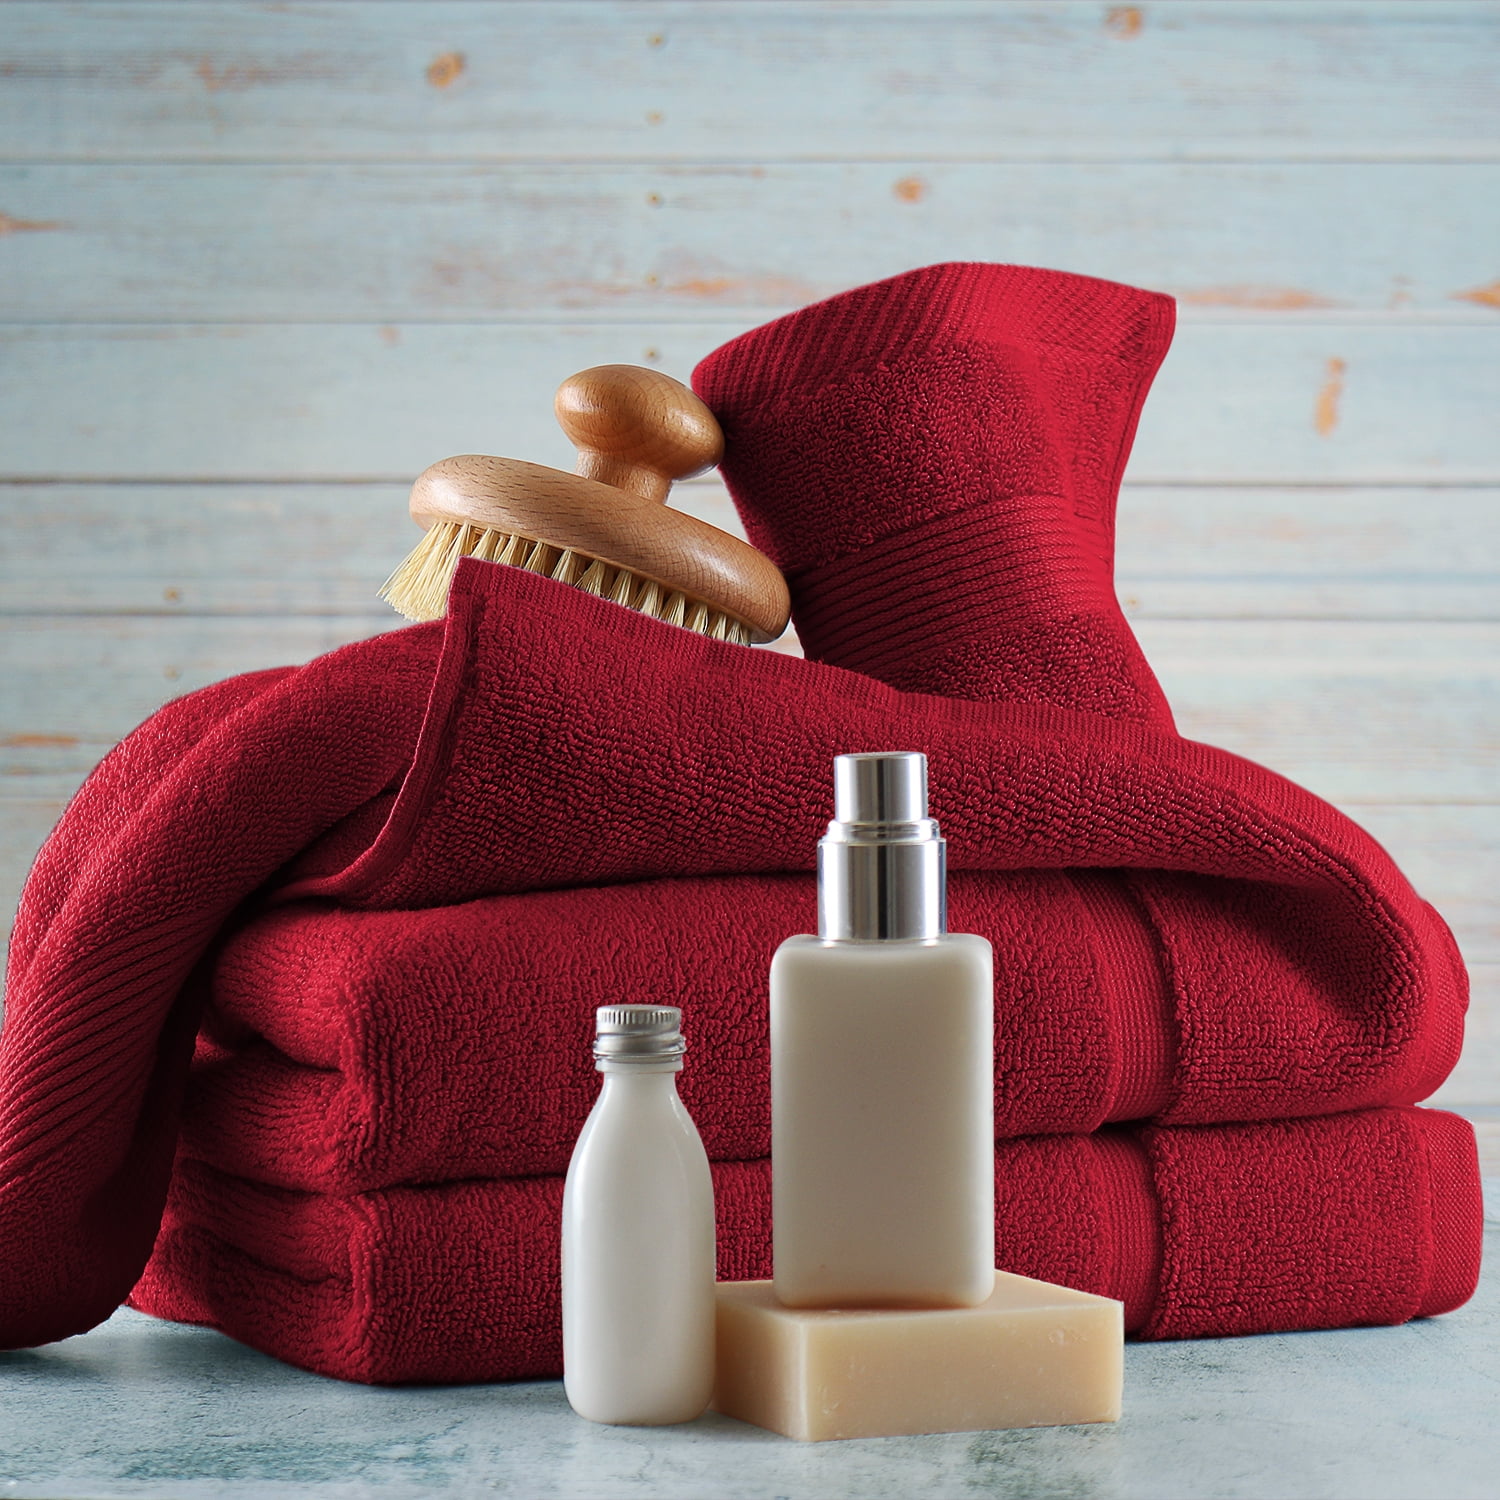 Homelover Towel Sets in Berry Red, Towel Collection